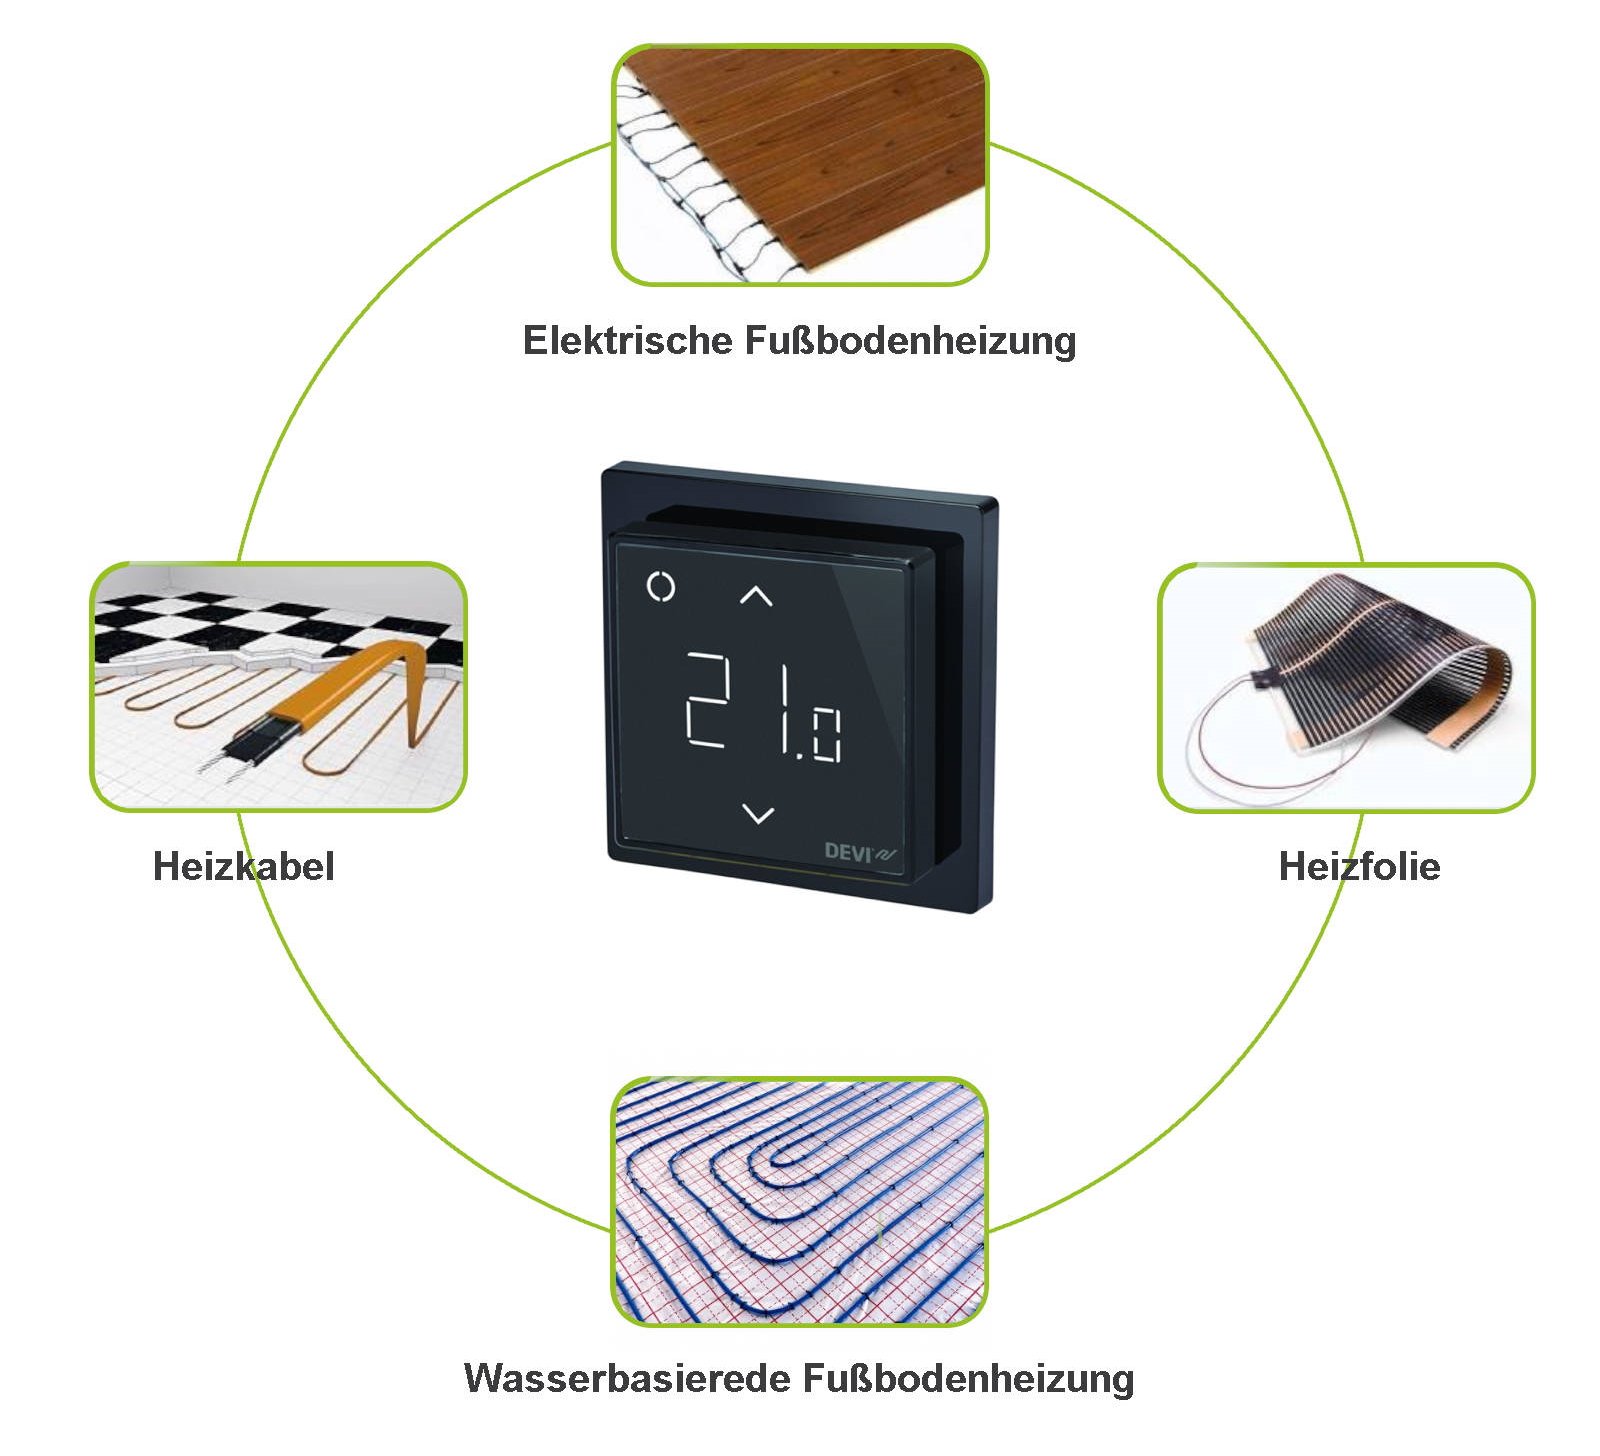 Thermostats are suitable for electric heating systems and water-guided underfloor heating systems